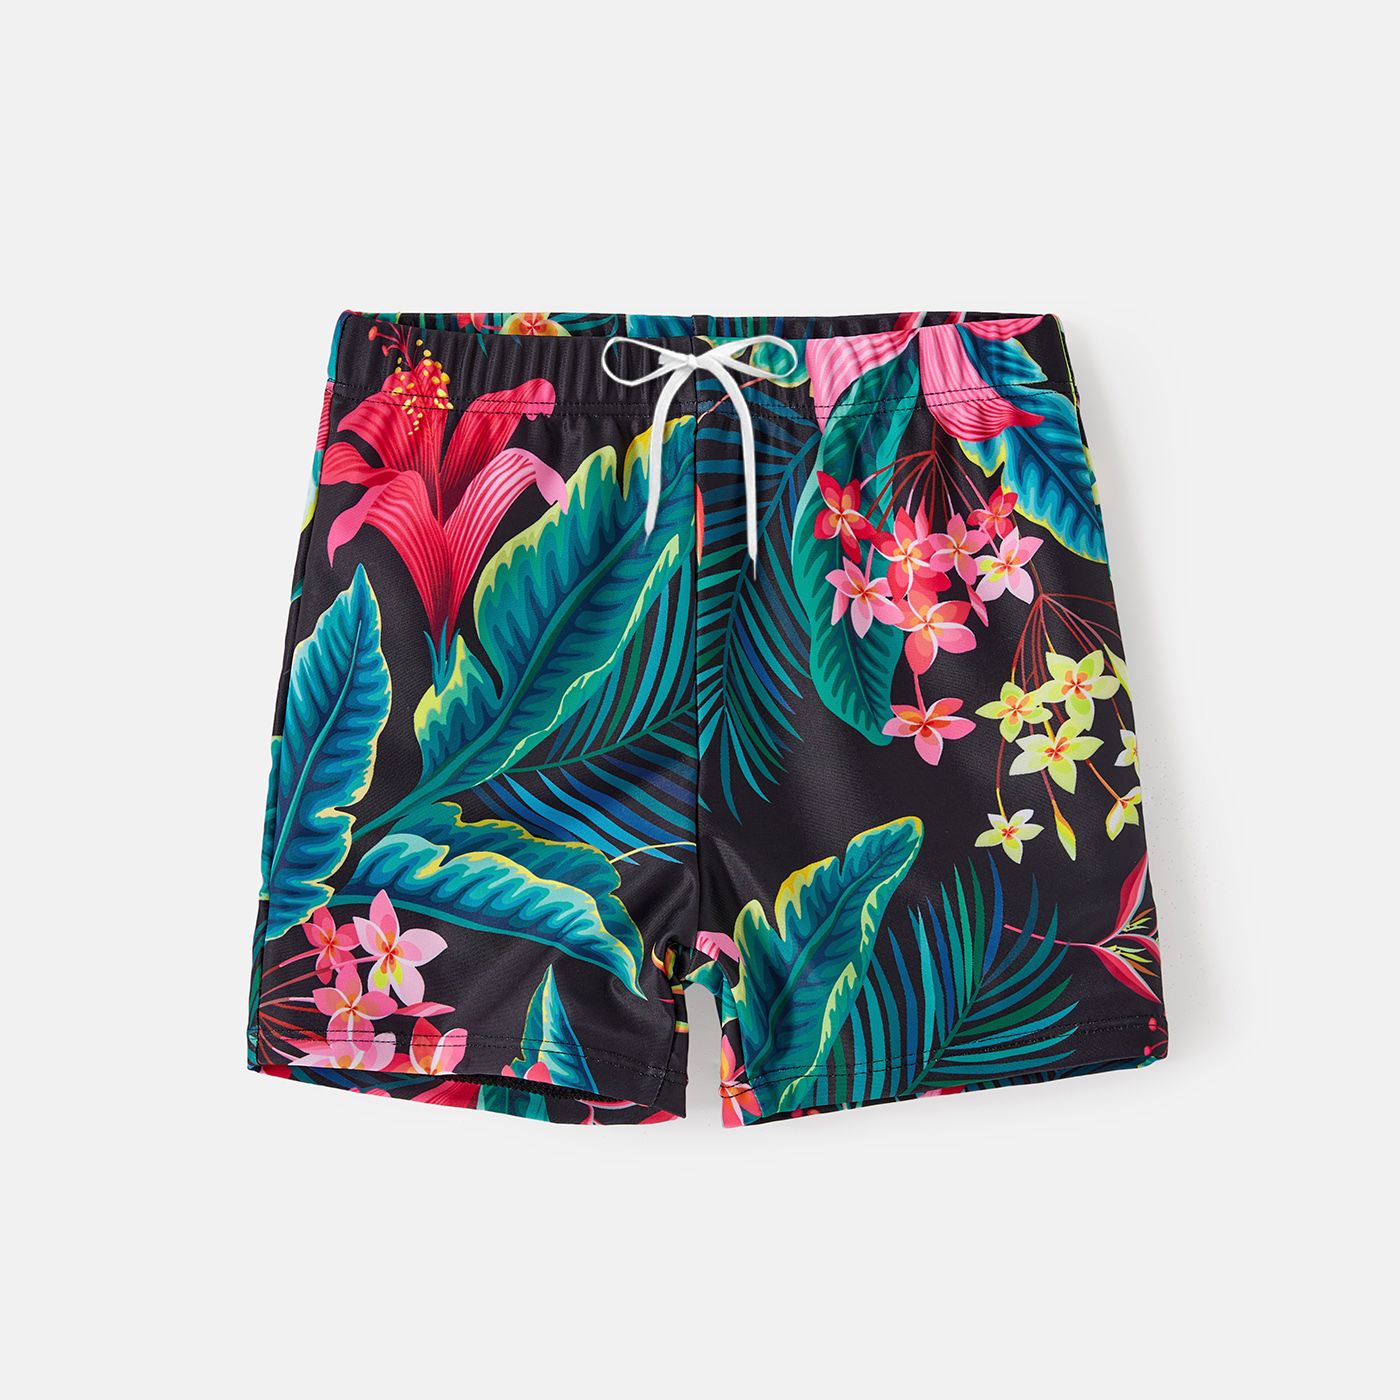 Family Matching Allover Plant Print Crisscross One-Piece Swimsuit And Swim Trunks